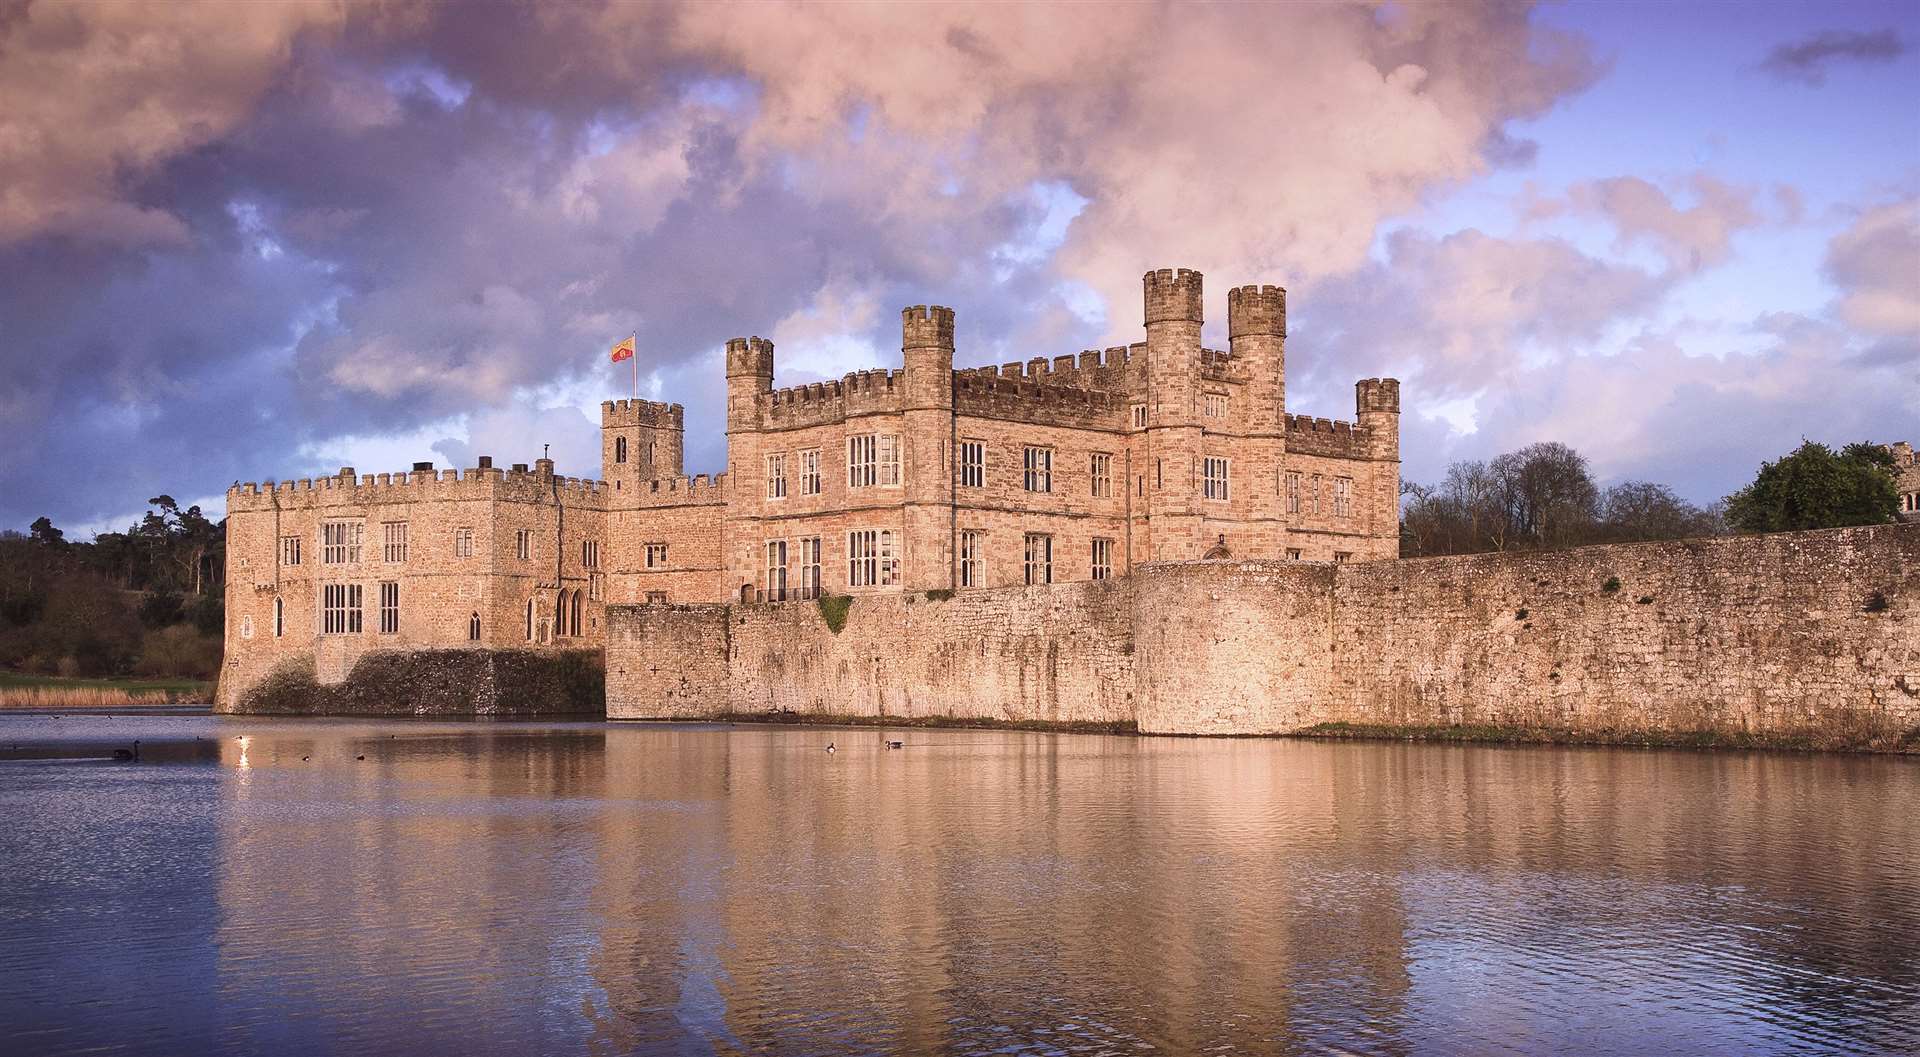 Concerns were raised a stream serving Leeds Castle could be affected by the sewage plans. Picture: Visit Kent